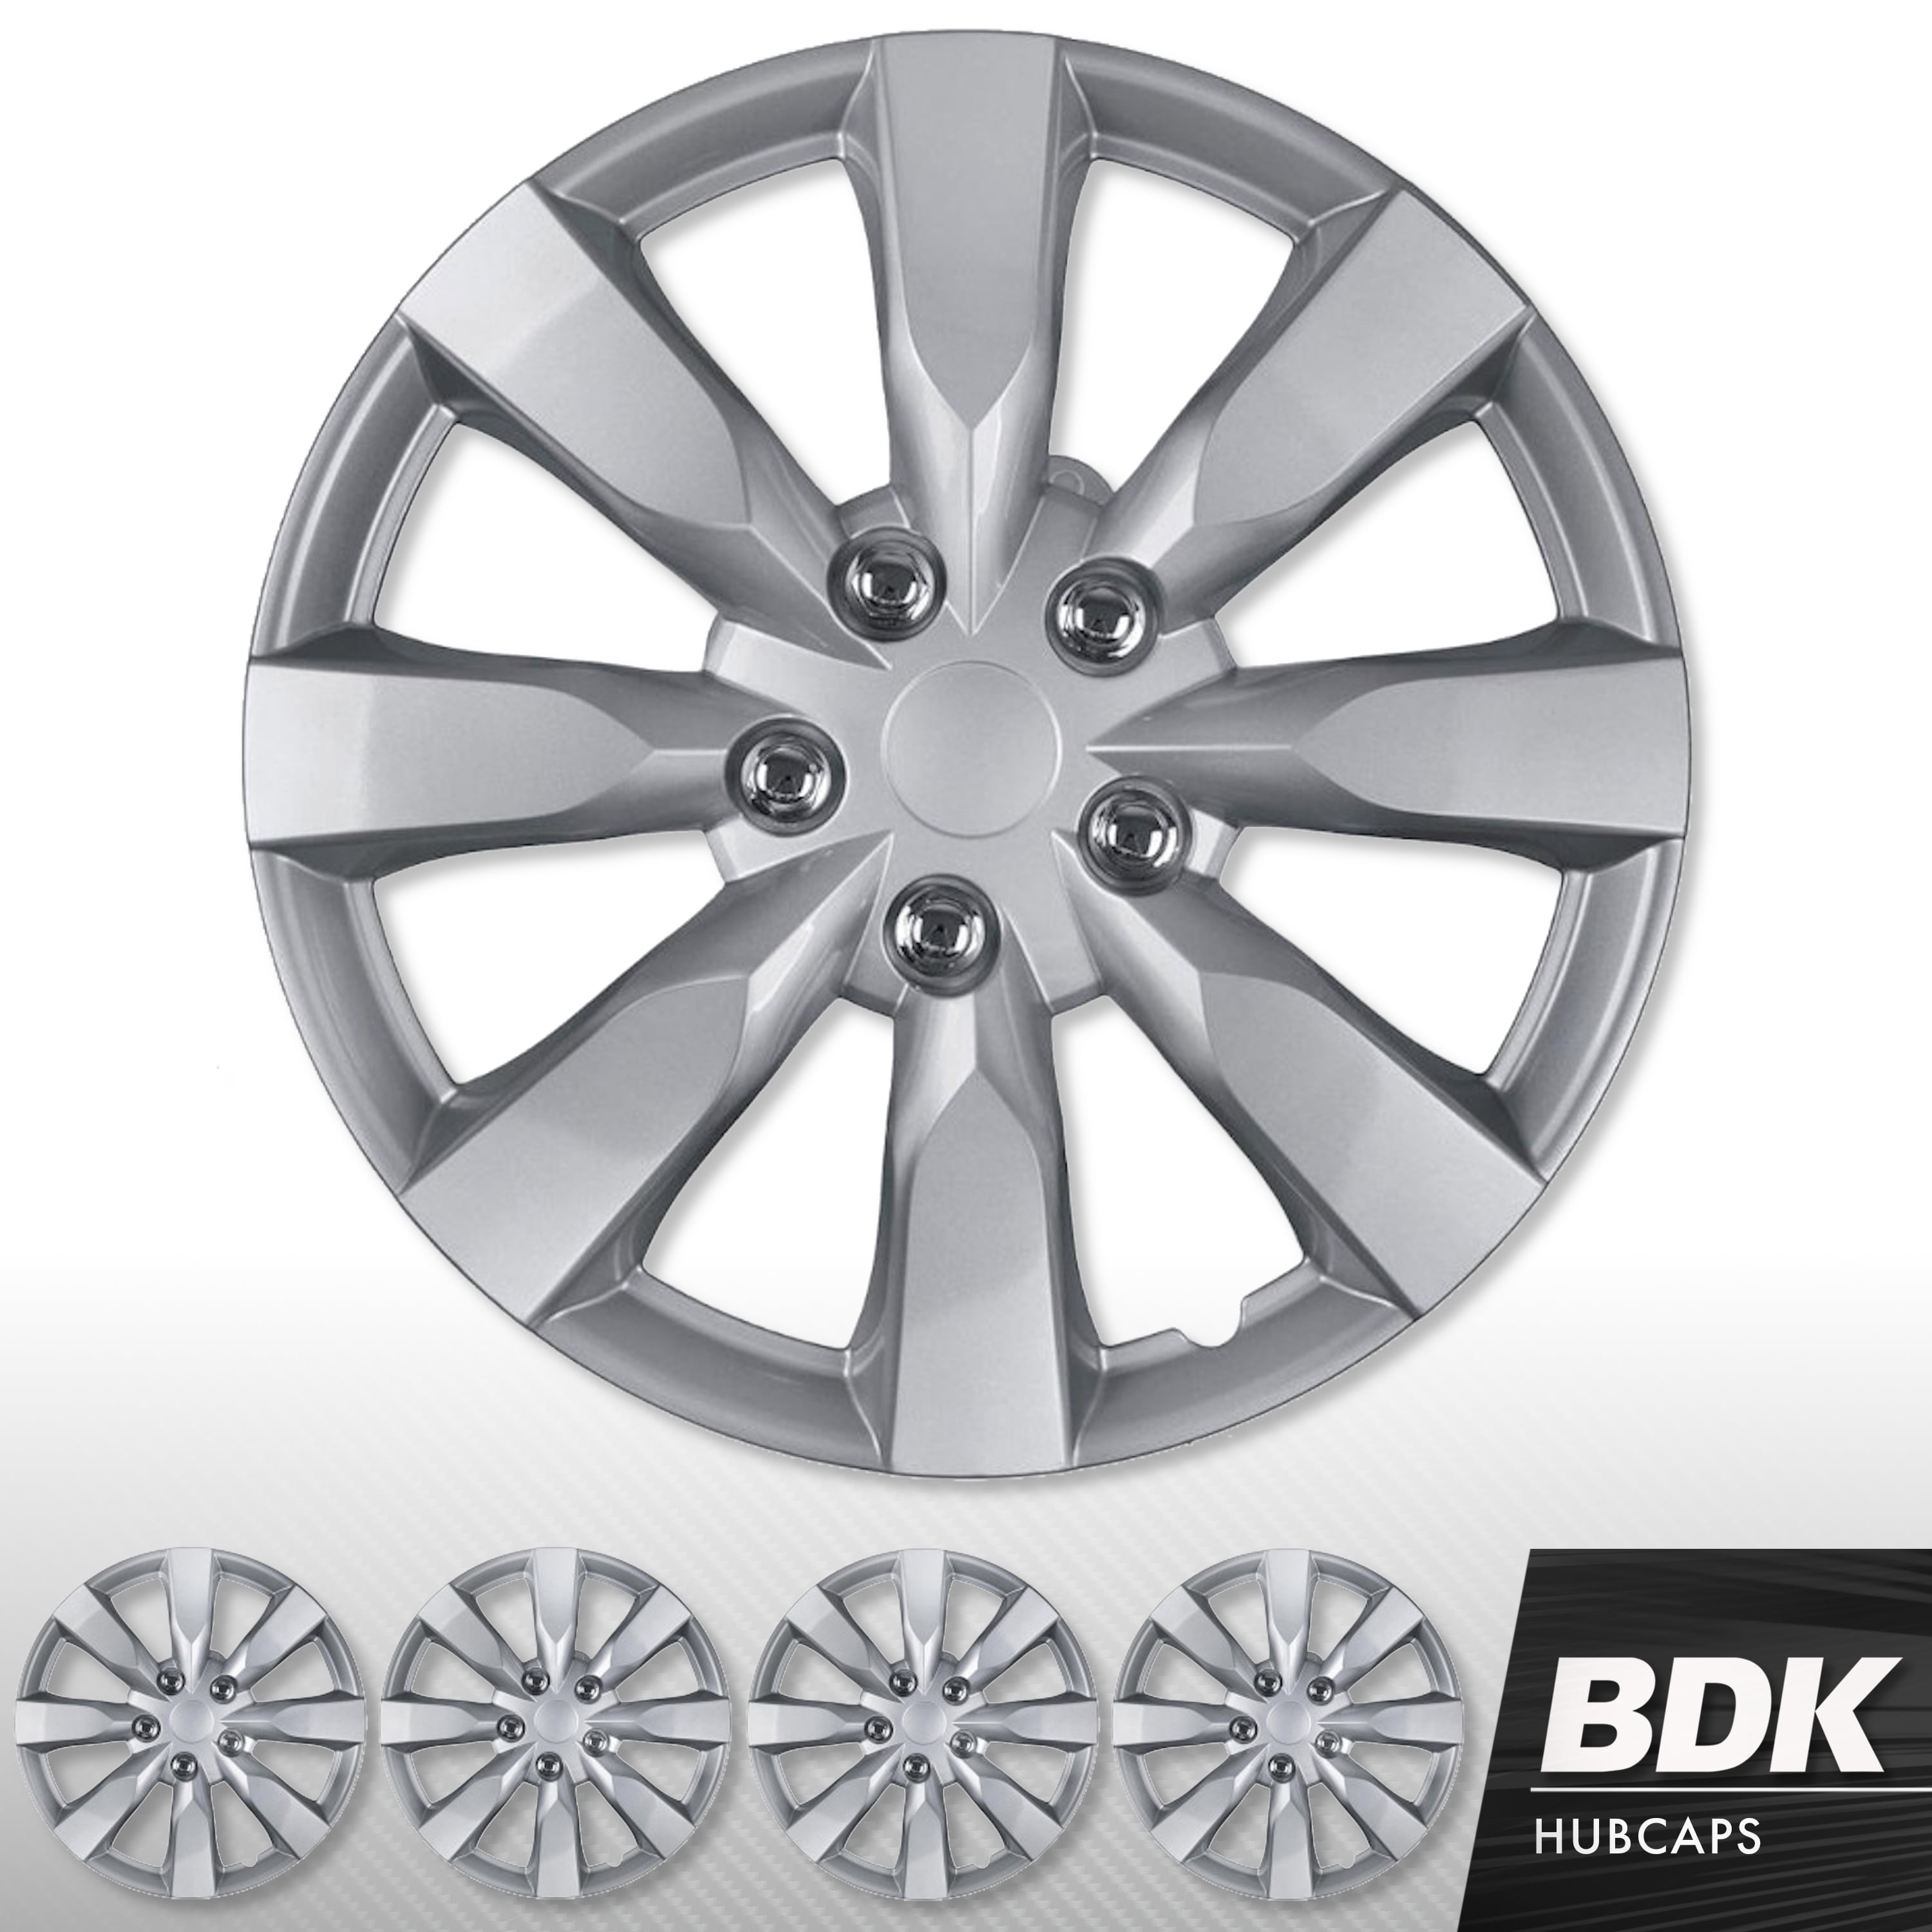 BDK 4 Pack of Premium 16 inch Hubcap Wheel Cover Replacements for OEM Steel Wheels, High Grade ABS with Retention Ring 